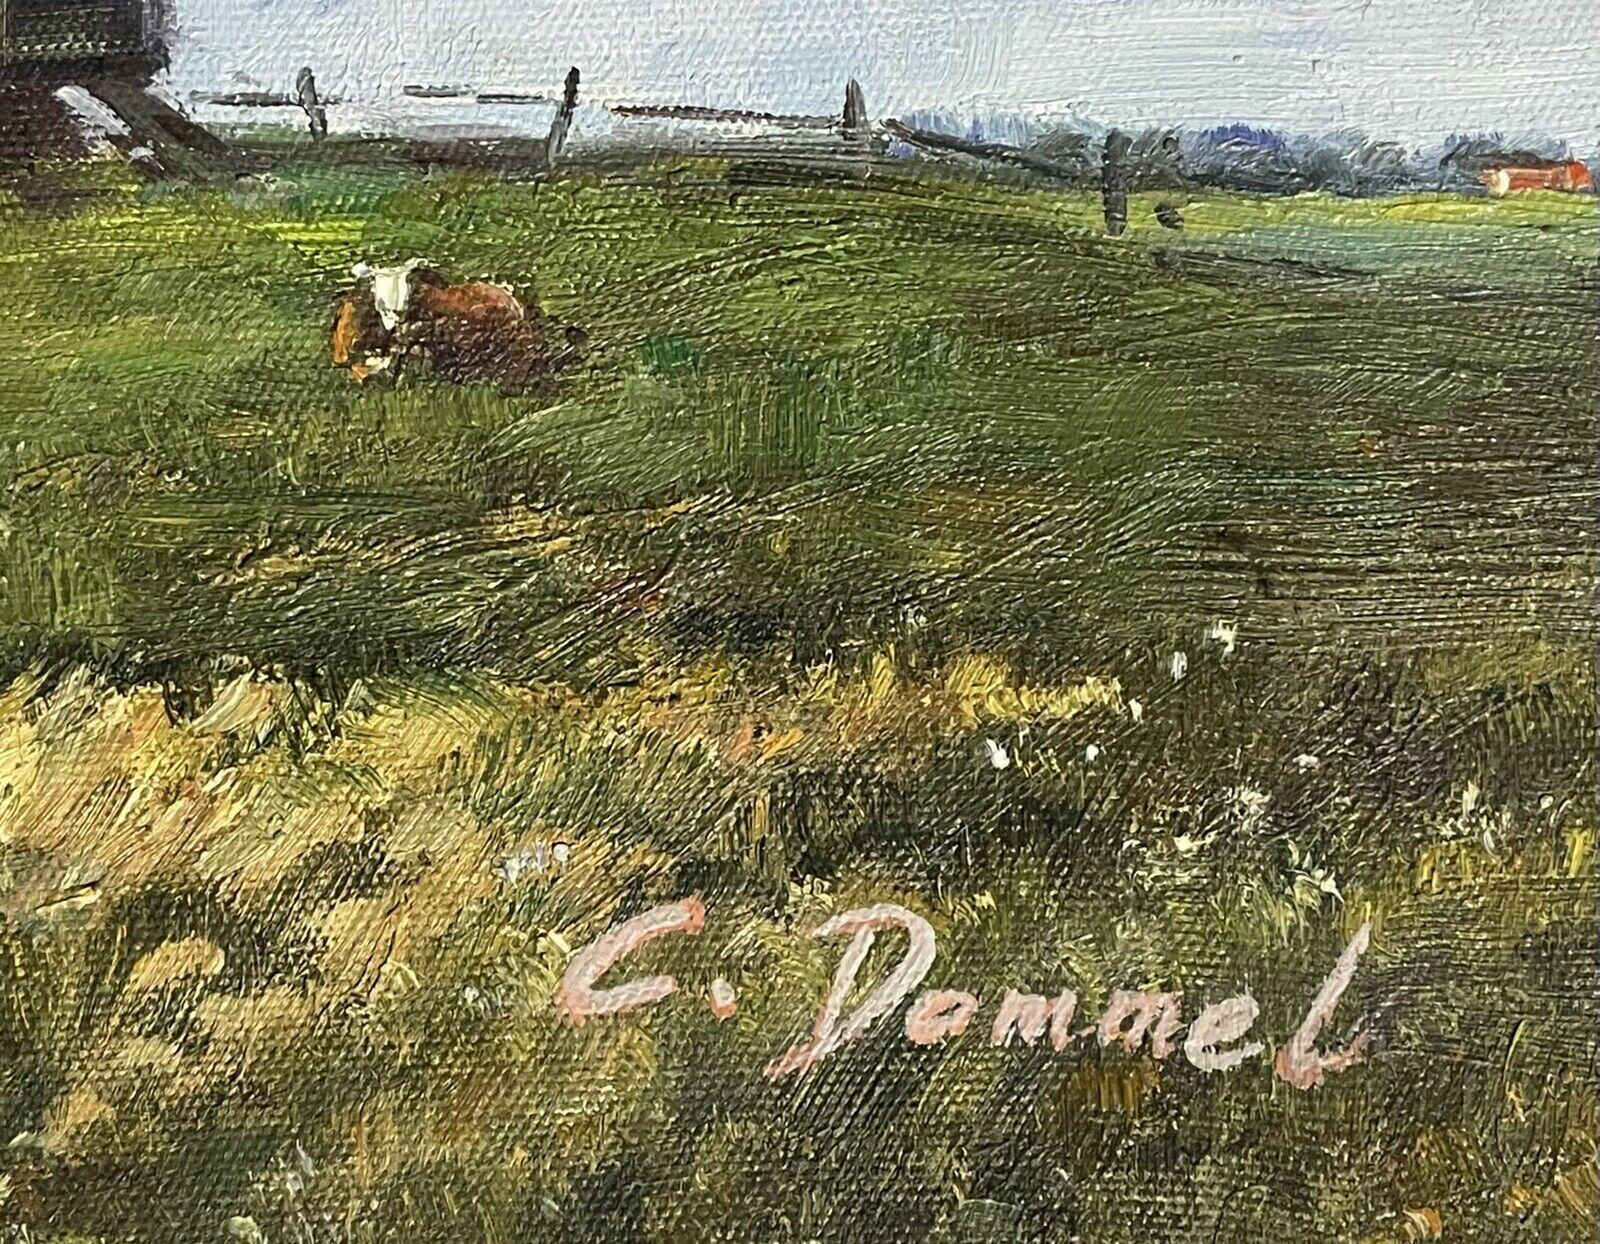 Artist/ School: C. Dammel (French contemporary)

Title: Farm Landscape

Medium: oil painting on canvas, framed.

Size:  painting: 12 x 16 inches, frame: 19.75 x 23.75 inches 

Provenance: from a private collection in Auvers-Sur-Oise,